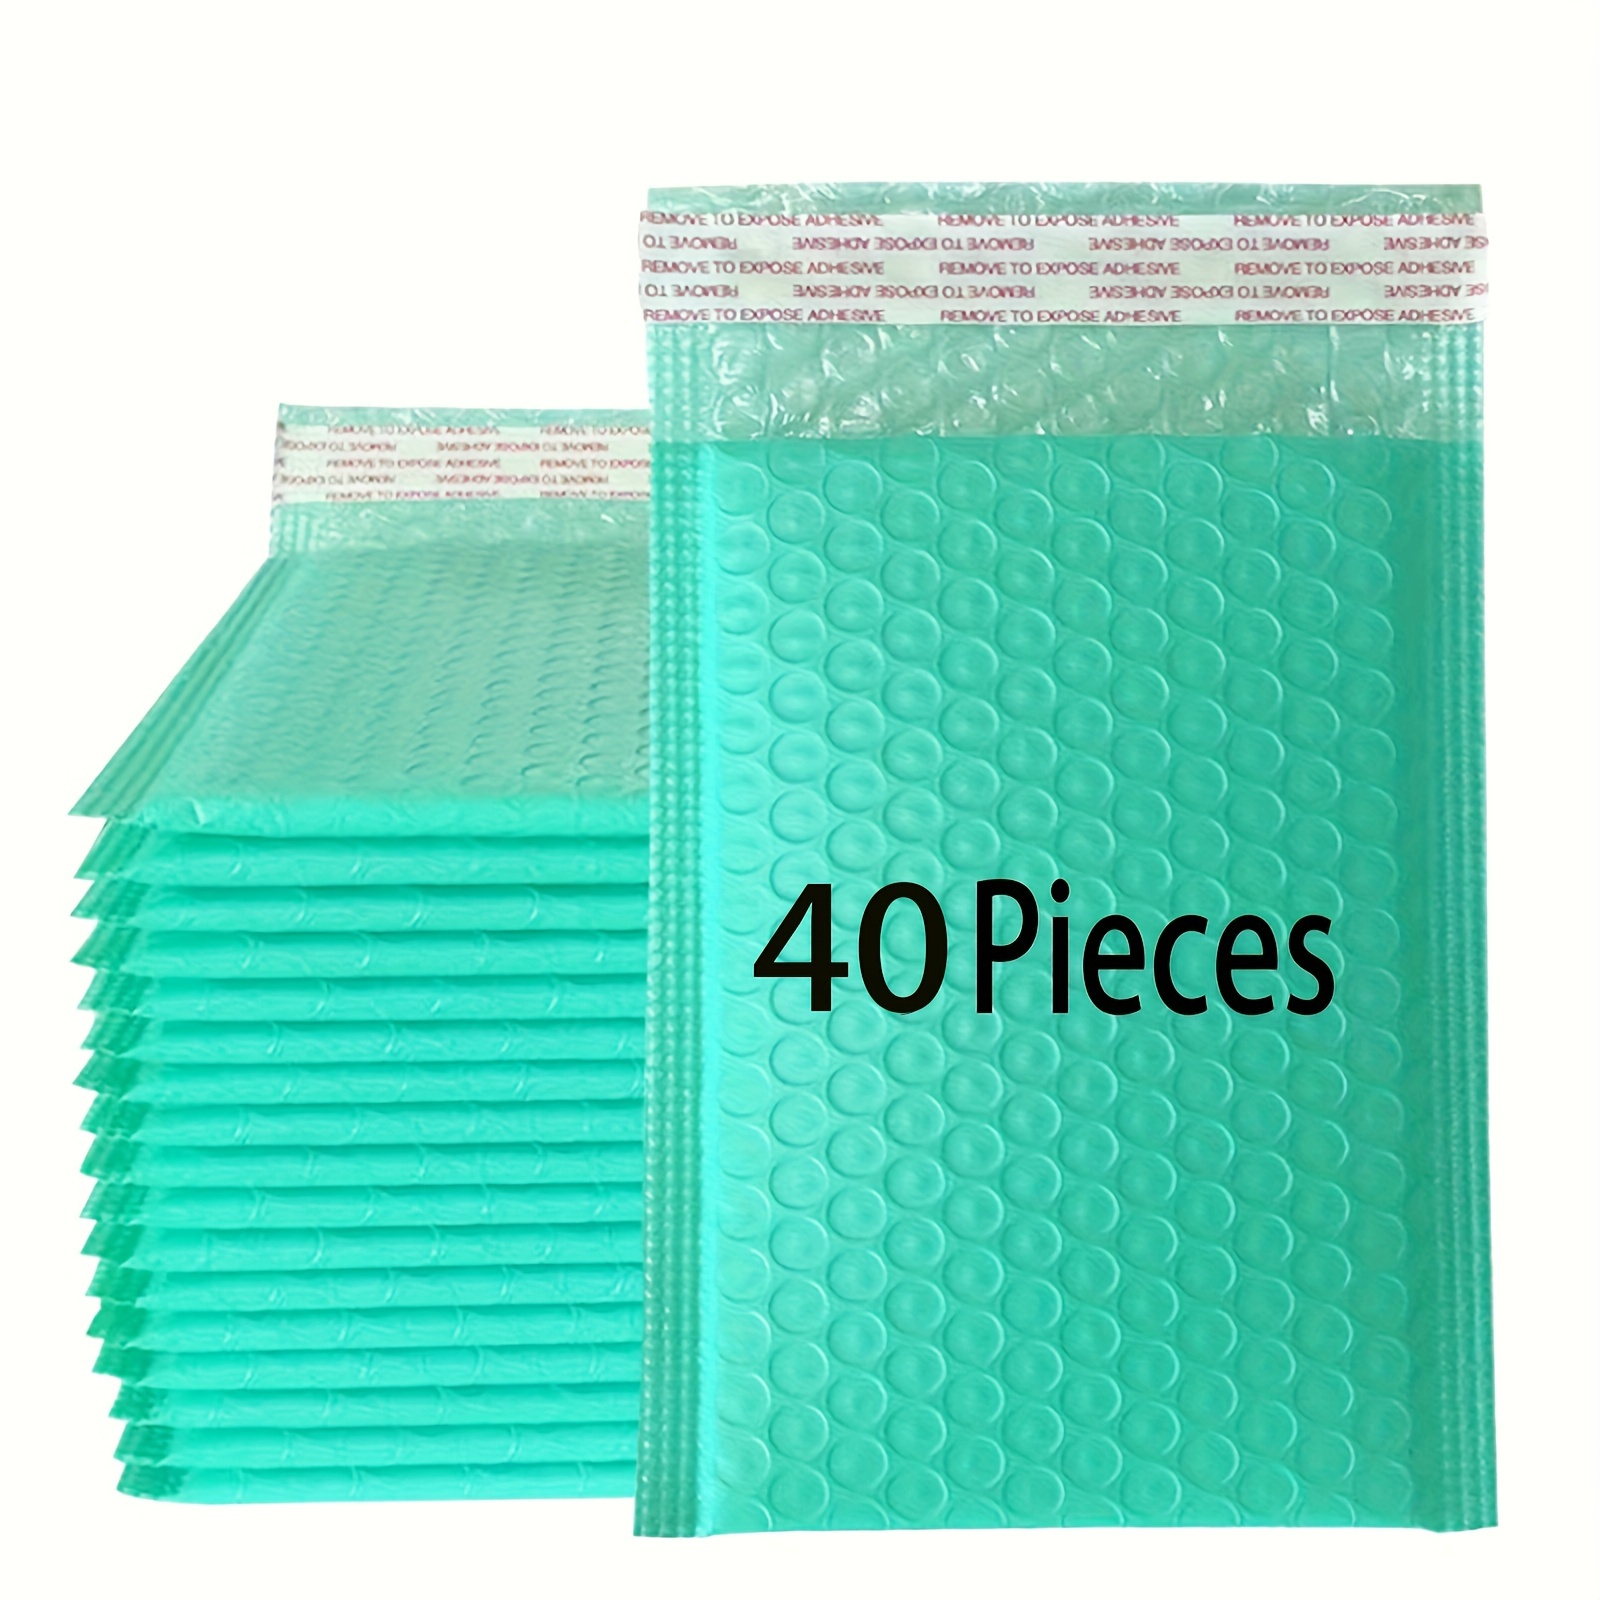 

20/25/36/40pcs Large Capacity Green Self-adhesive Waterproof Bubble Bags Small Business Mailing Waterproof Boutique Mailing Jewelry Cosmetics - Great For Buffering And Pressure Resistant Storage